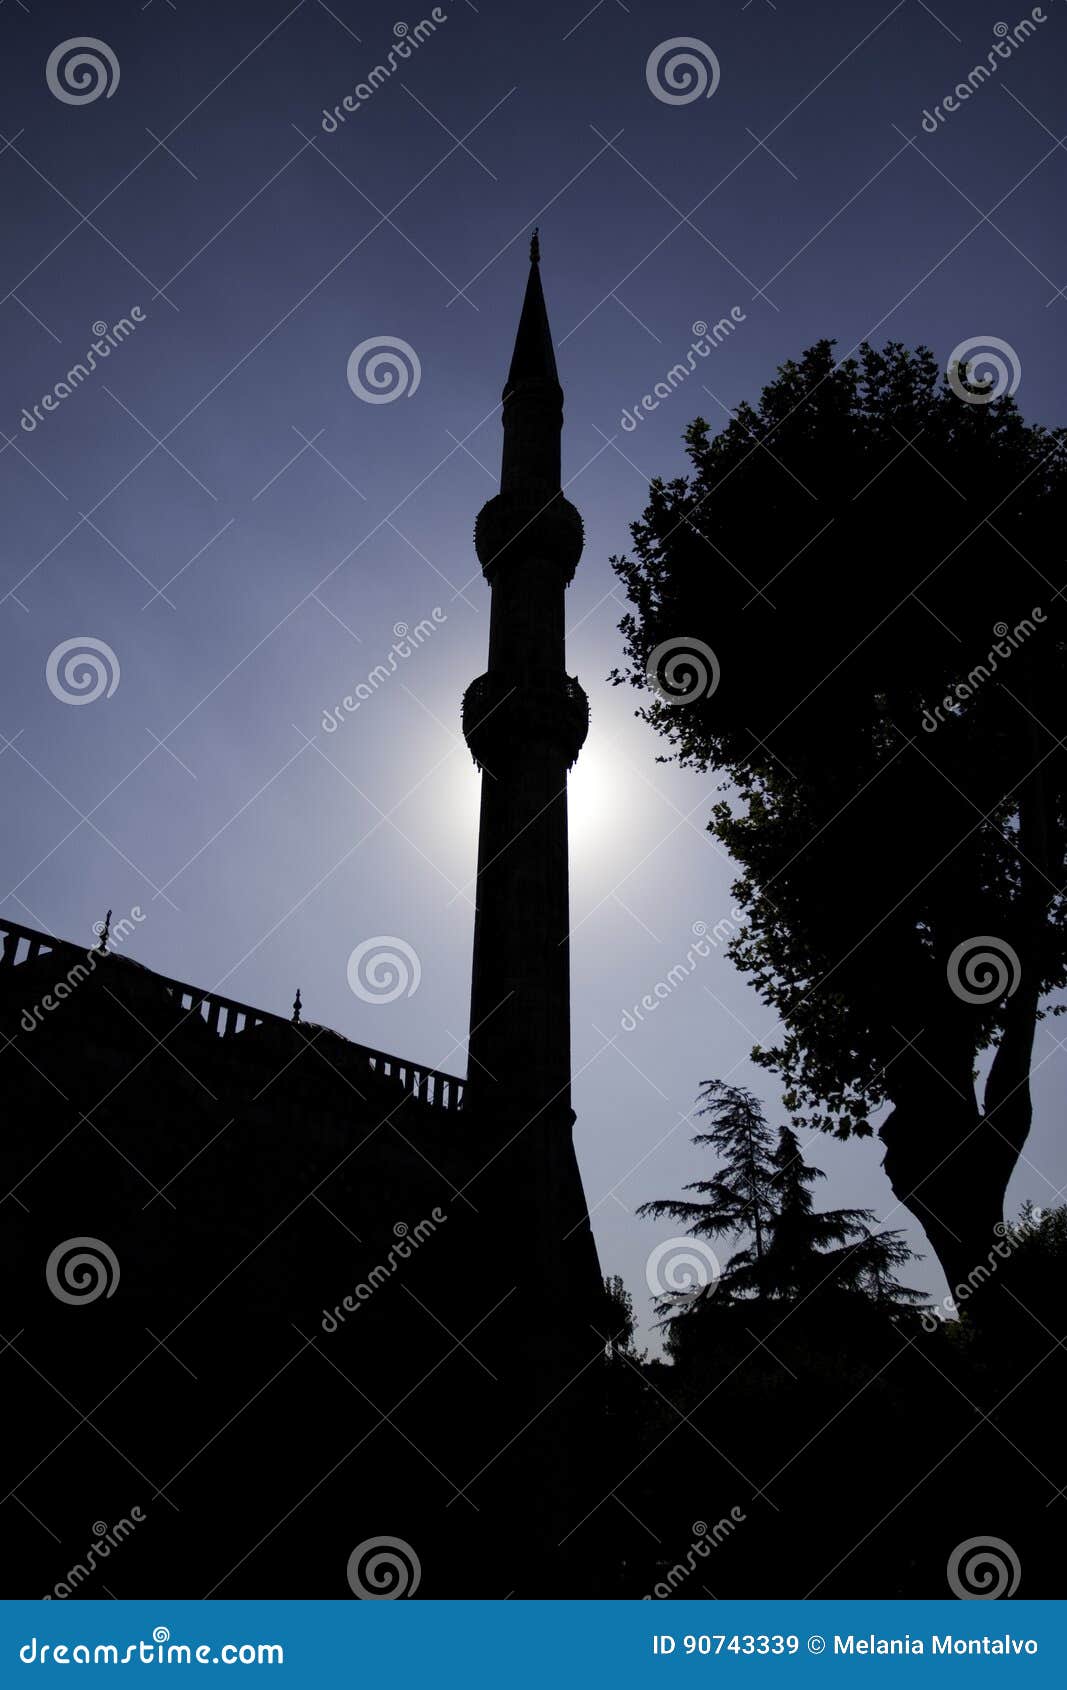 shadows of a minaret in istanbul